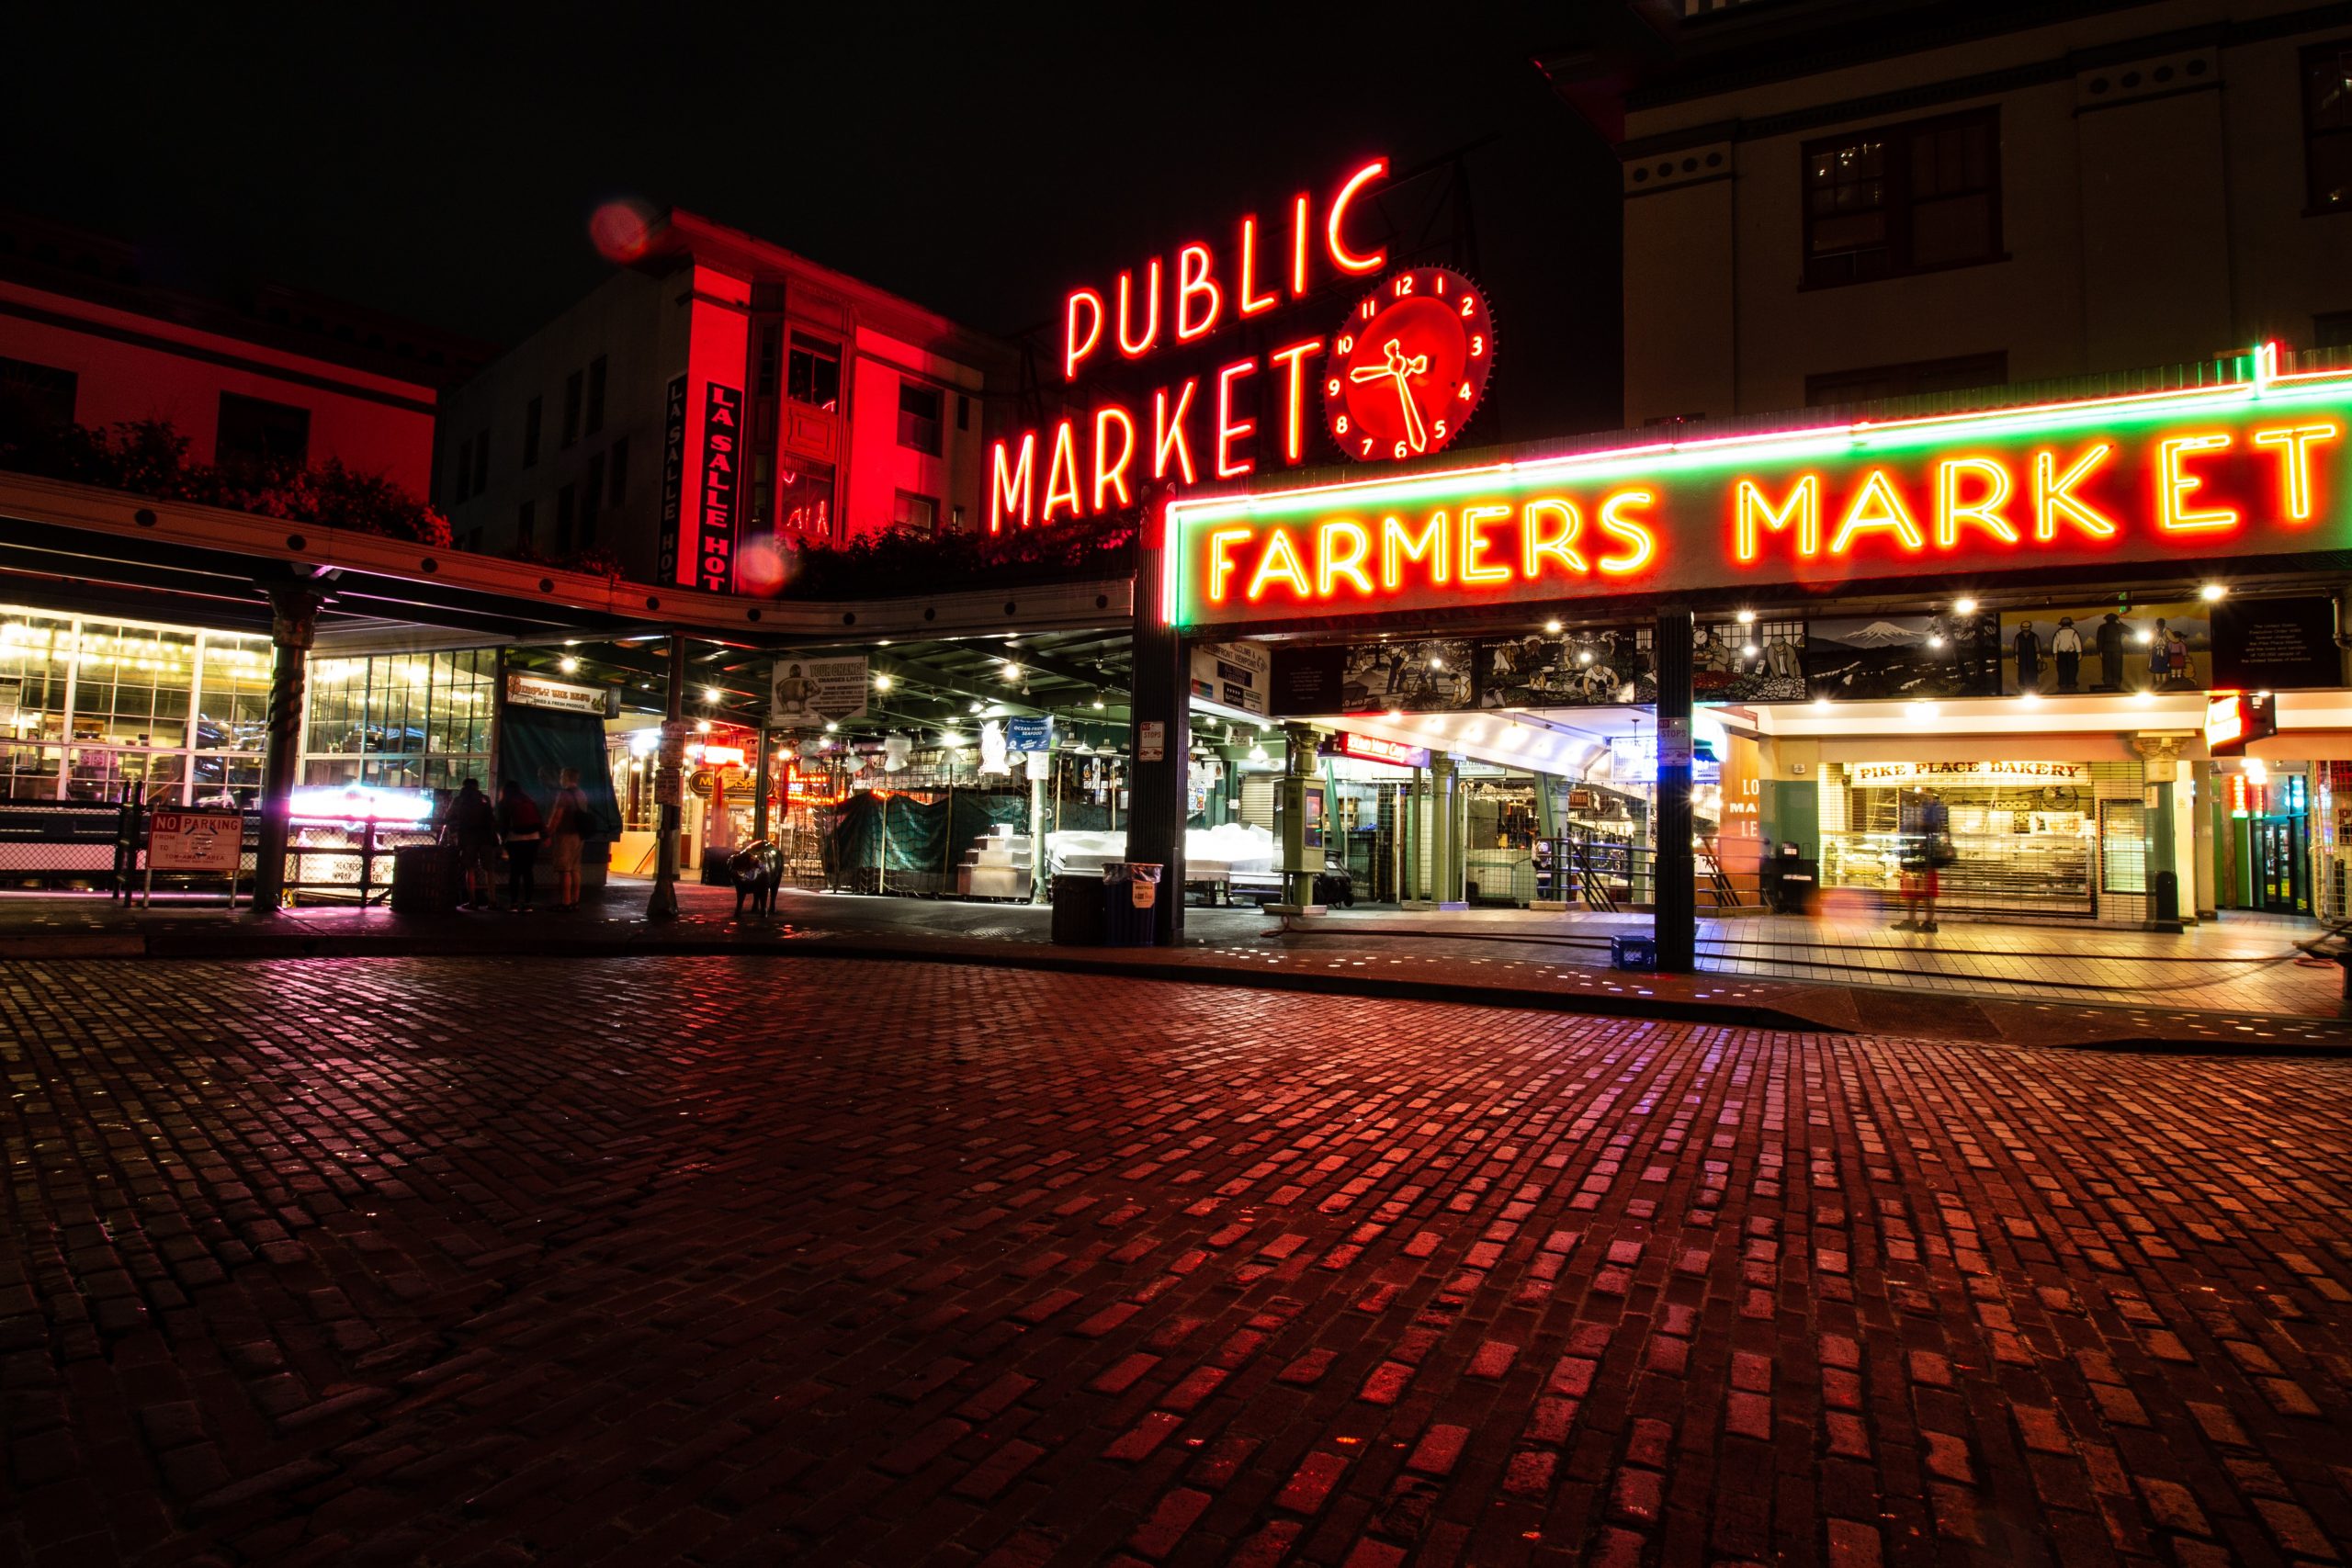 Pike place market in the evening - stay nearby to be close to most attractions in Seattle